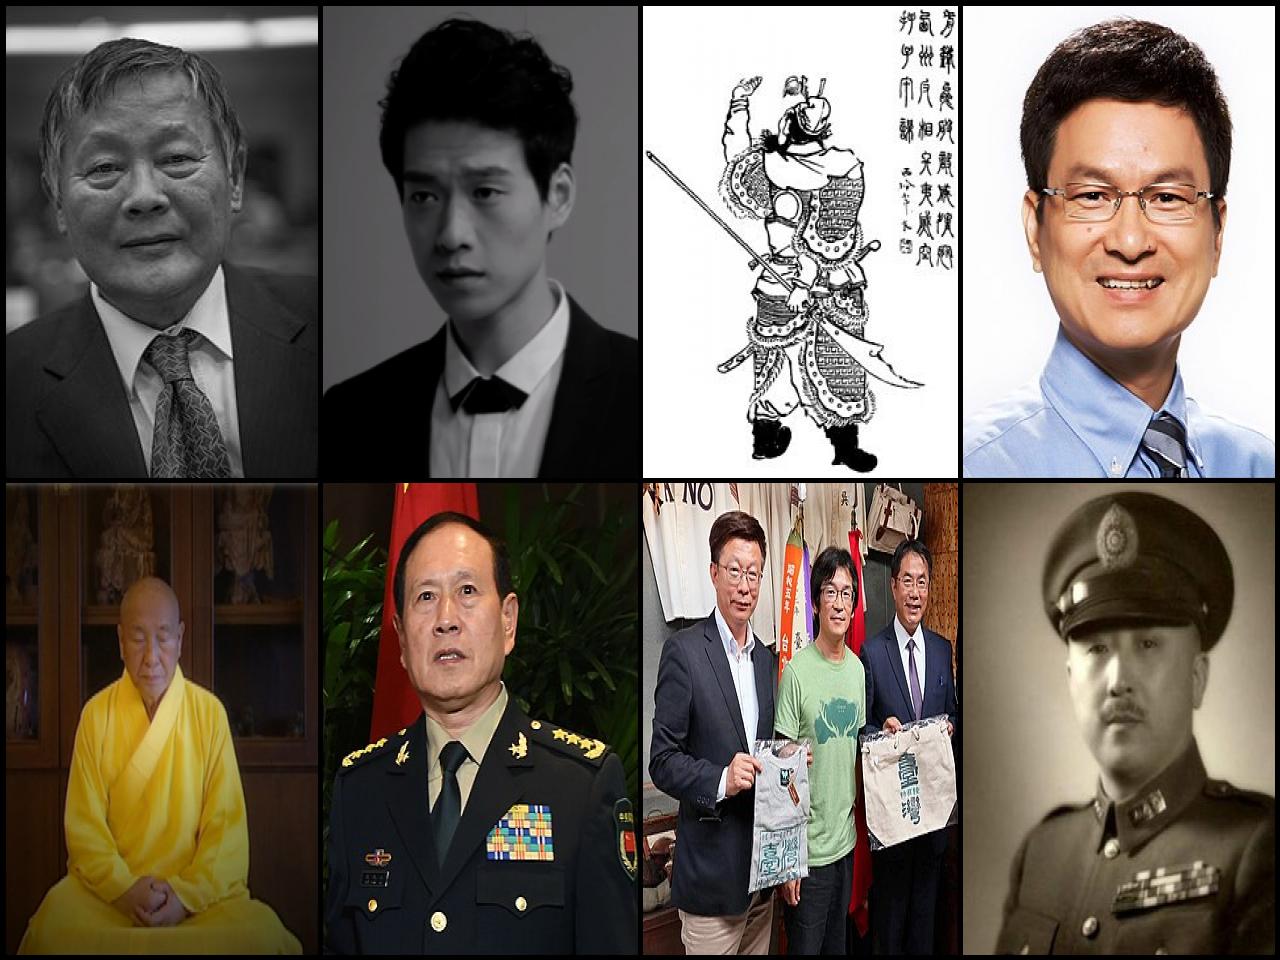 List of Famous people named <b>Wei</b>